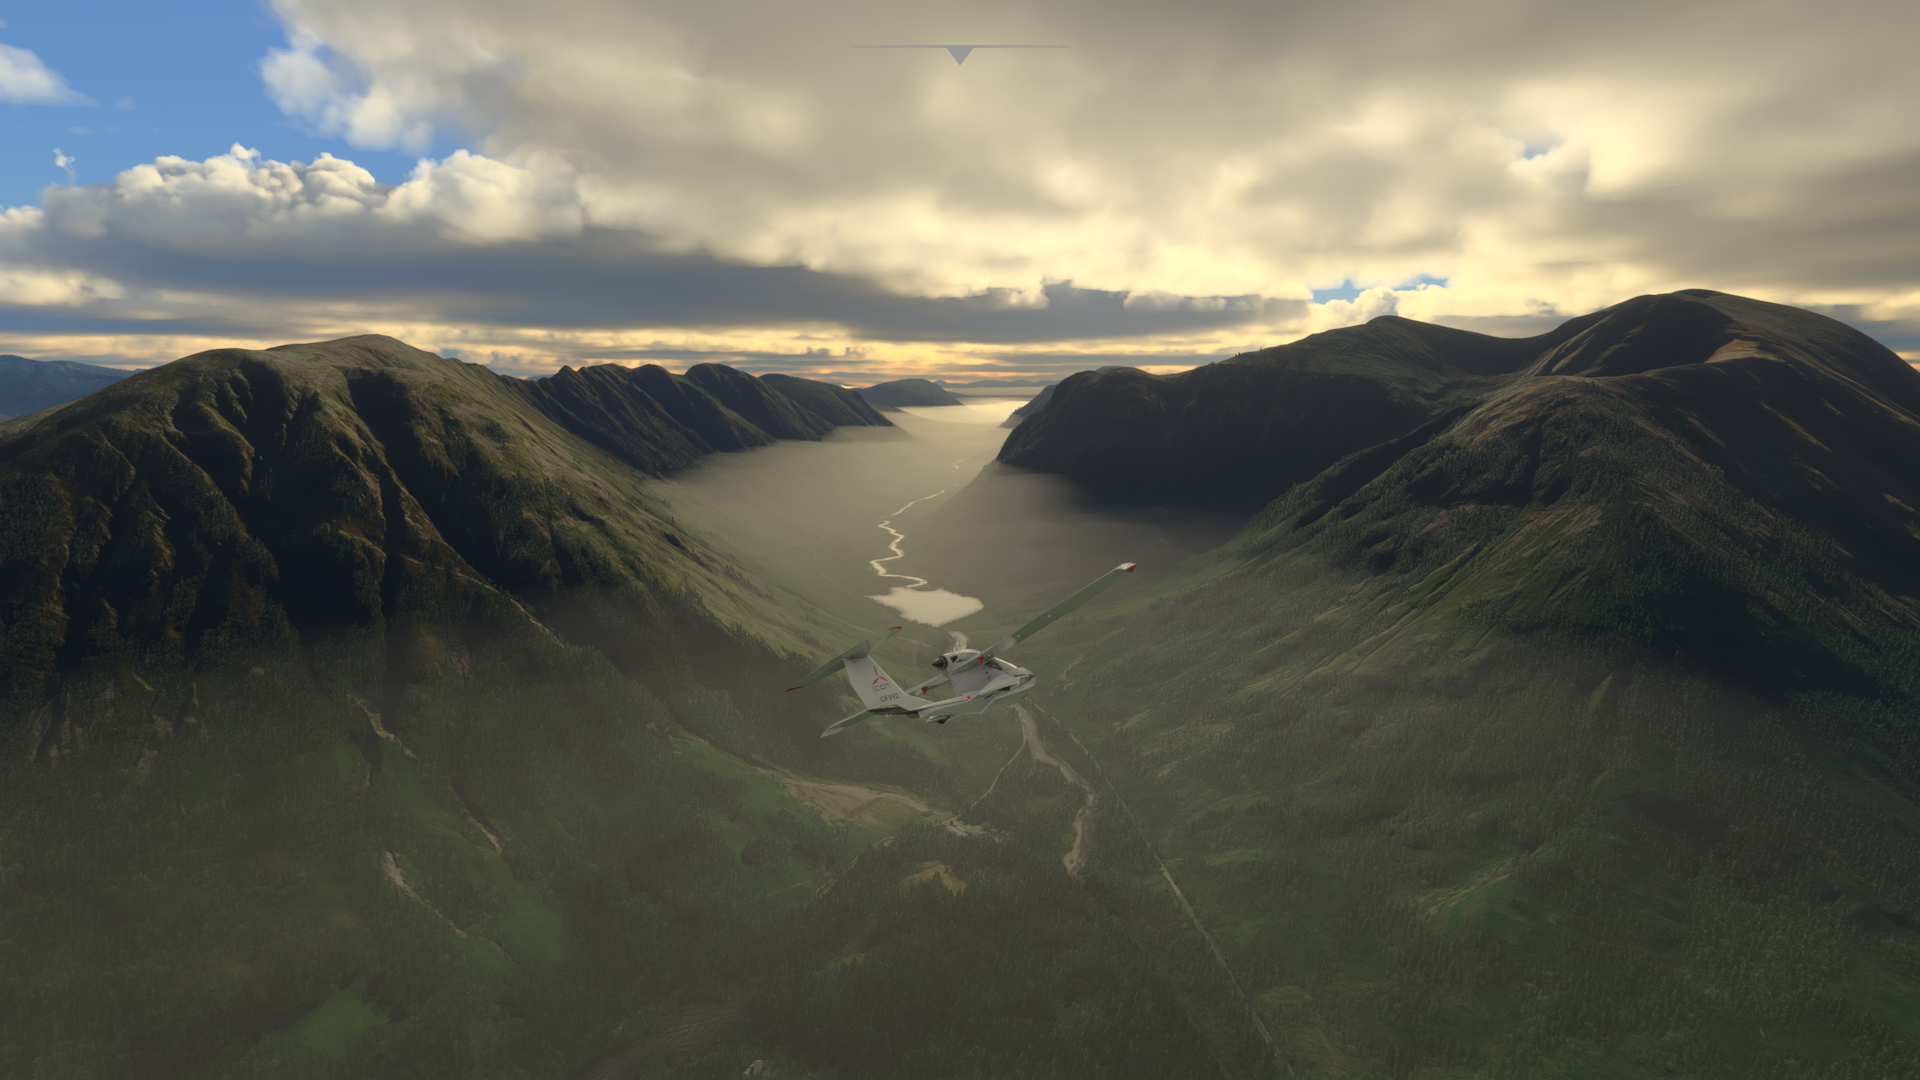 Flight over Scotland's Lochs and mountains with the Icon A5 | Microsoft Flight Simulator